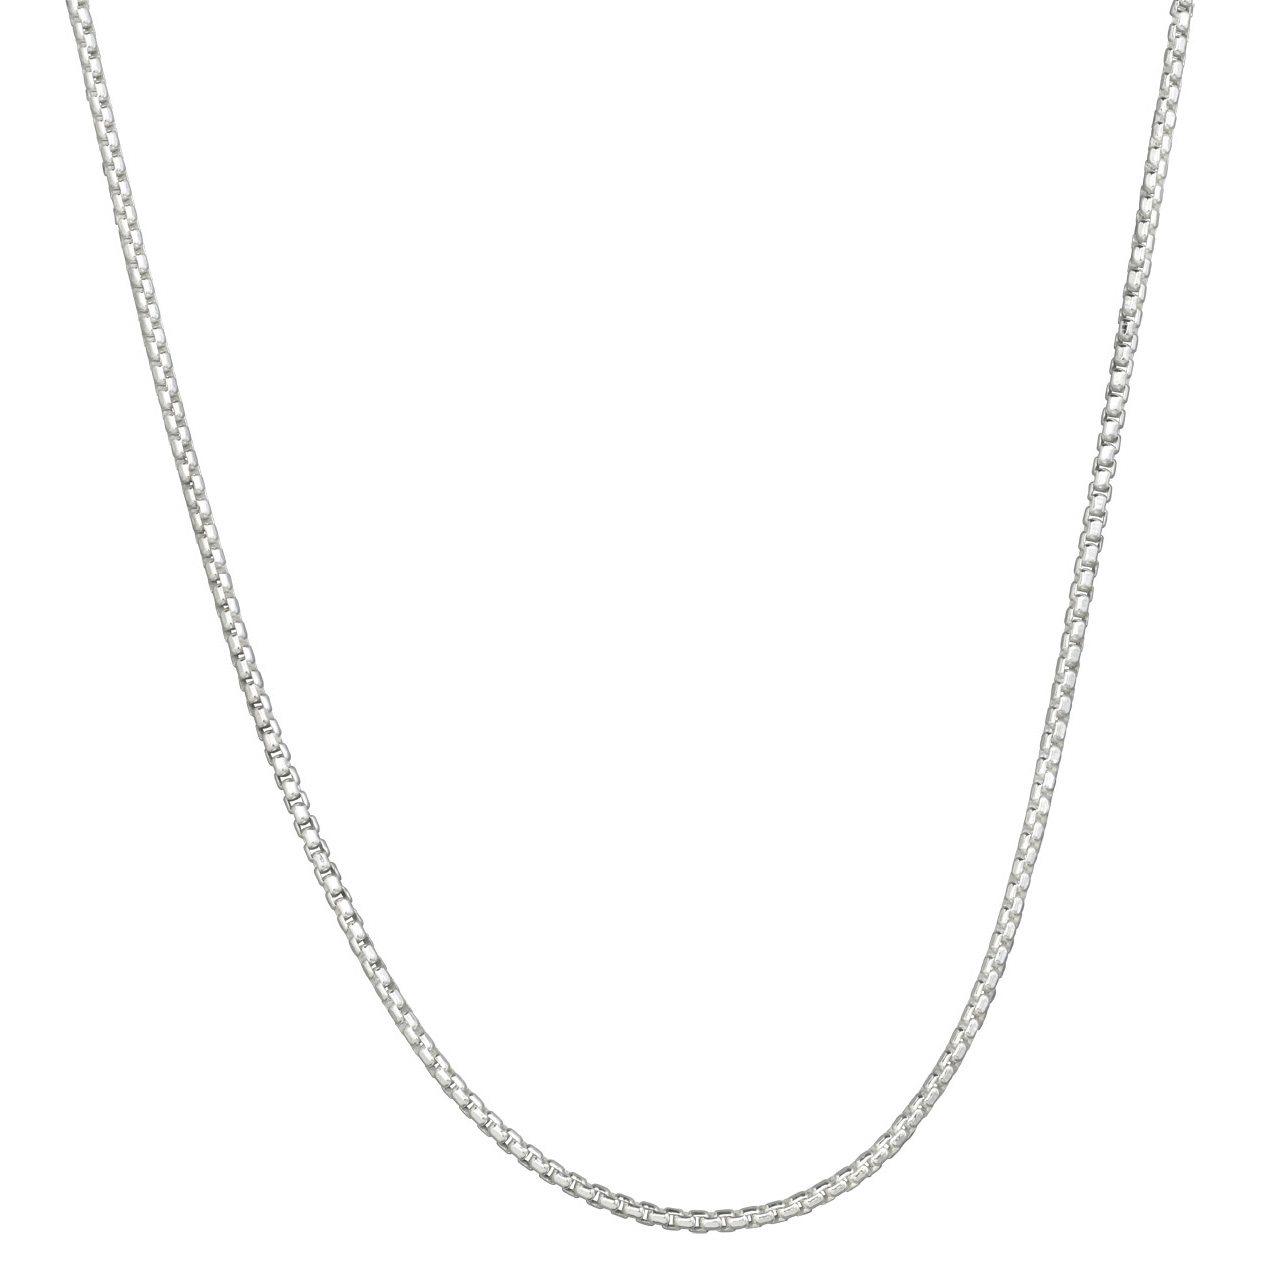 Rounded Box Chain 2mm 16" - The Silver Dahlia